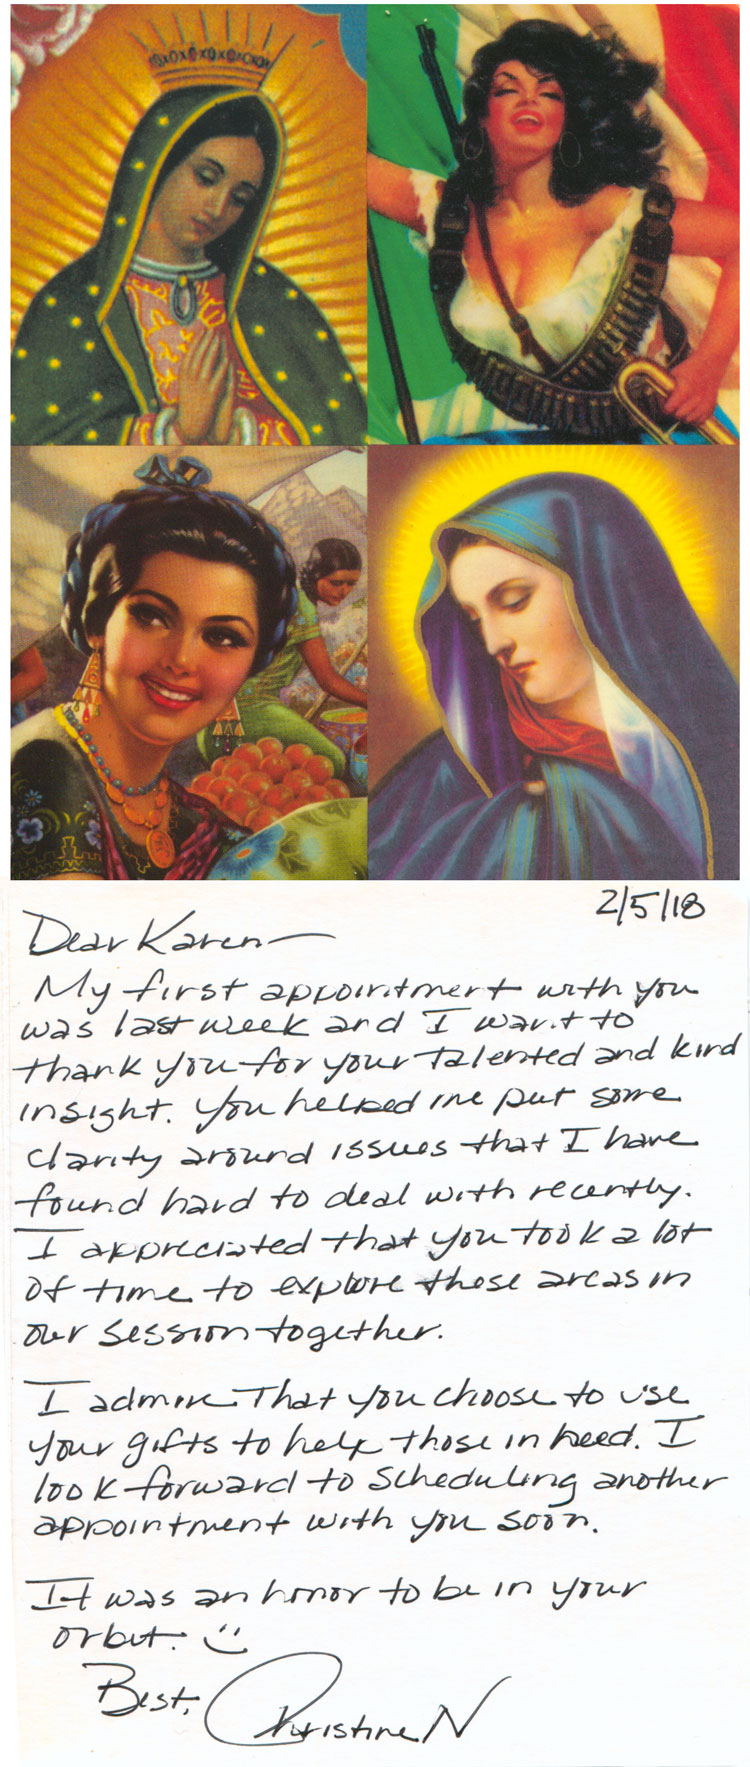 A personal card sent to Karen from Christine N. Text is in the web page.